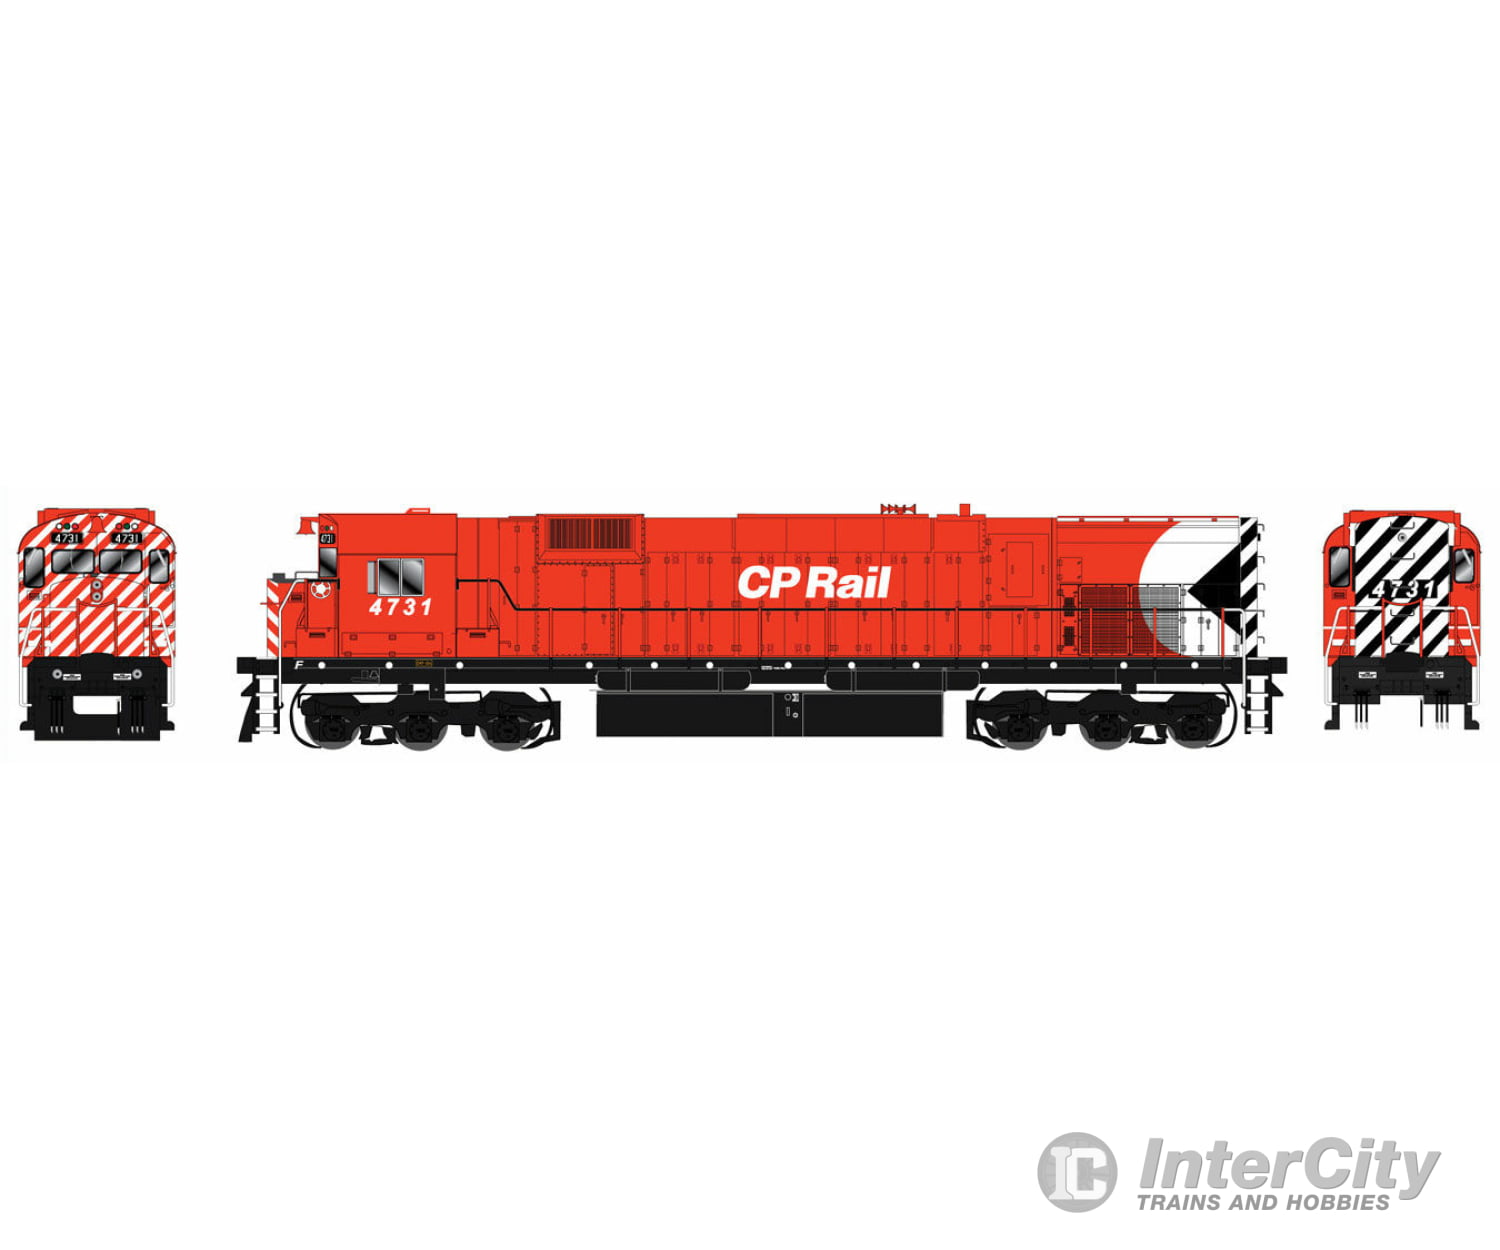 Bowser 24278 Ho Mlw M636 W/Loksound & Dcc - Executive Line -- Canadian Pacific #4731 (Action Red 5